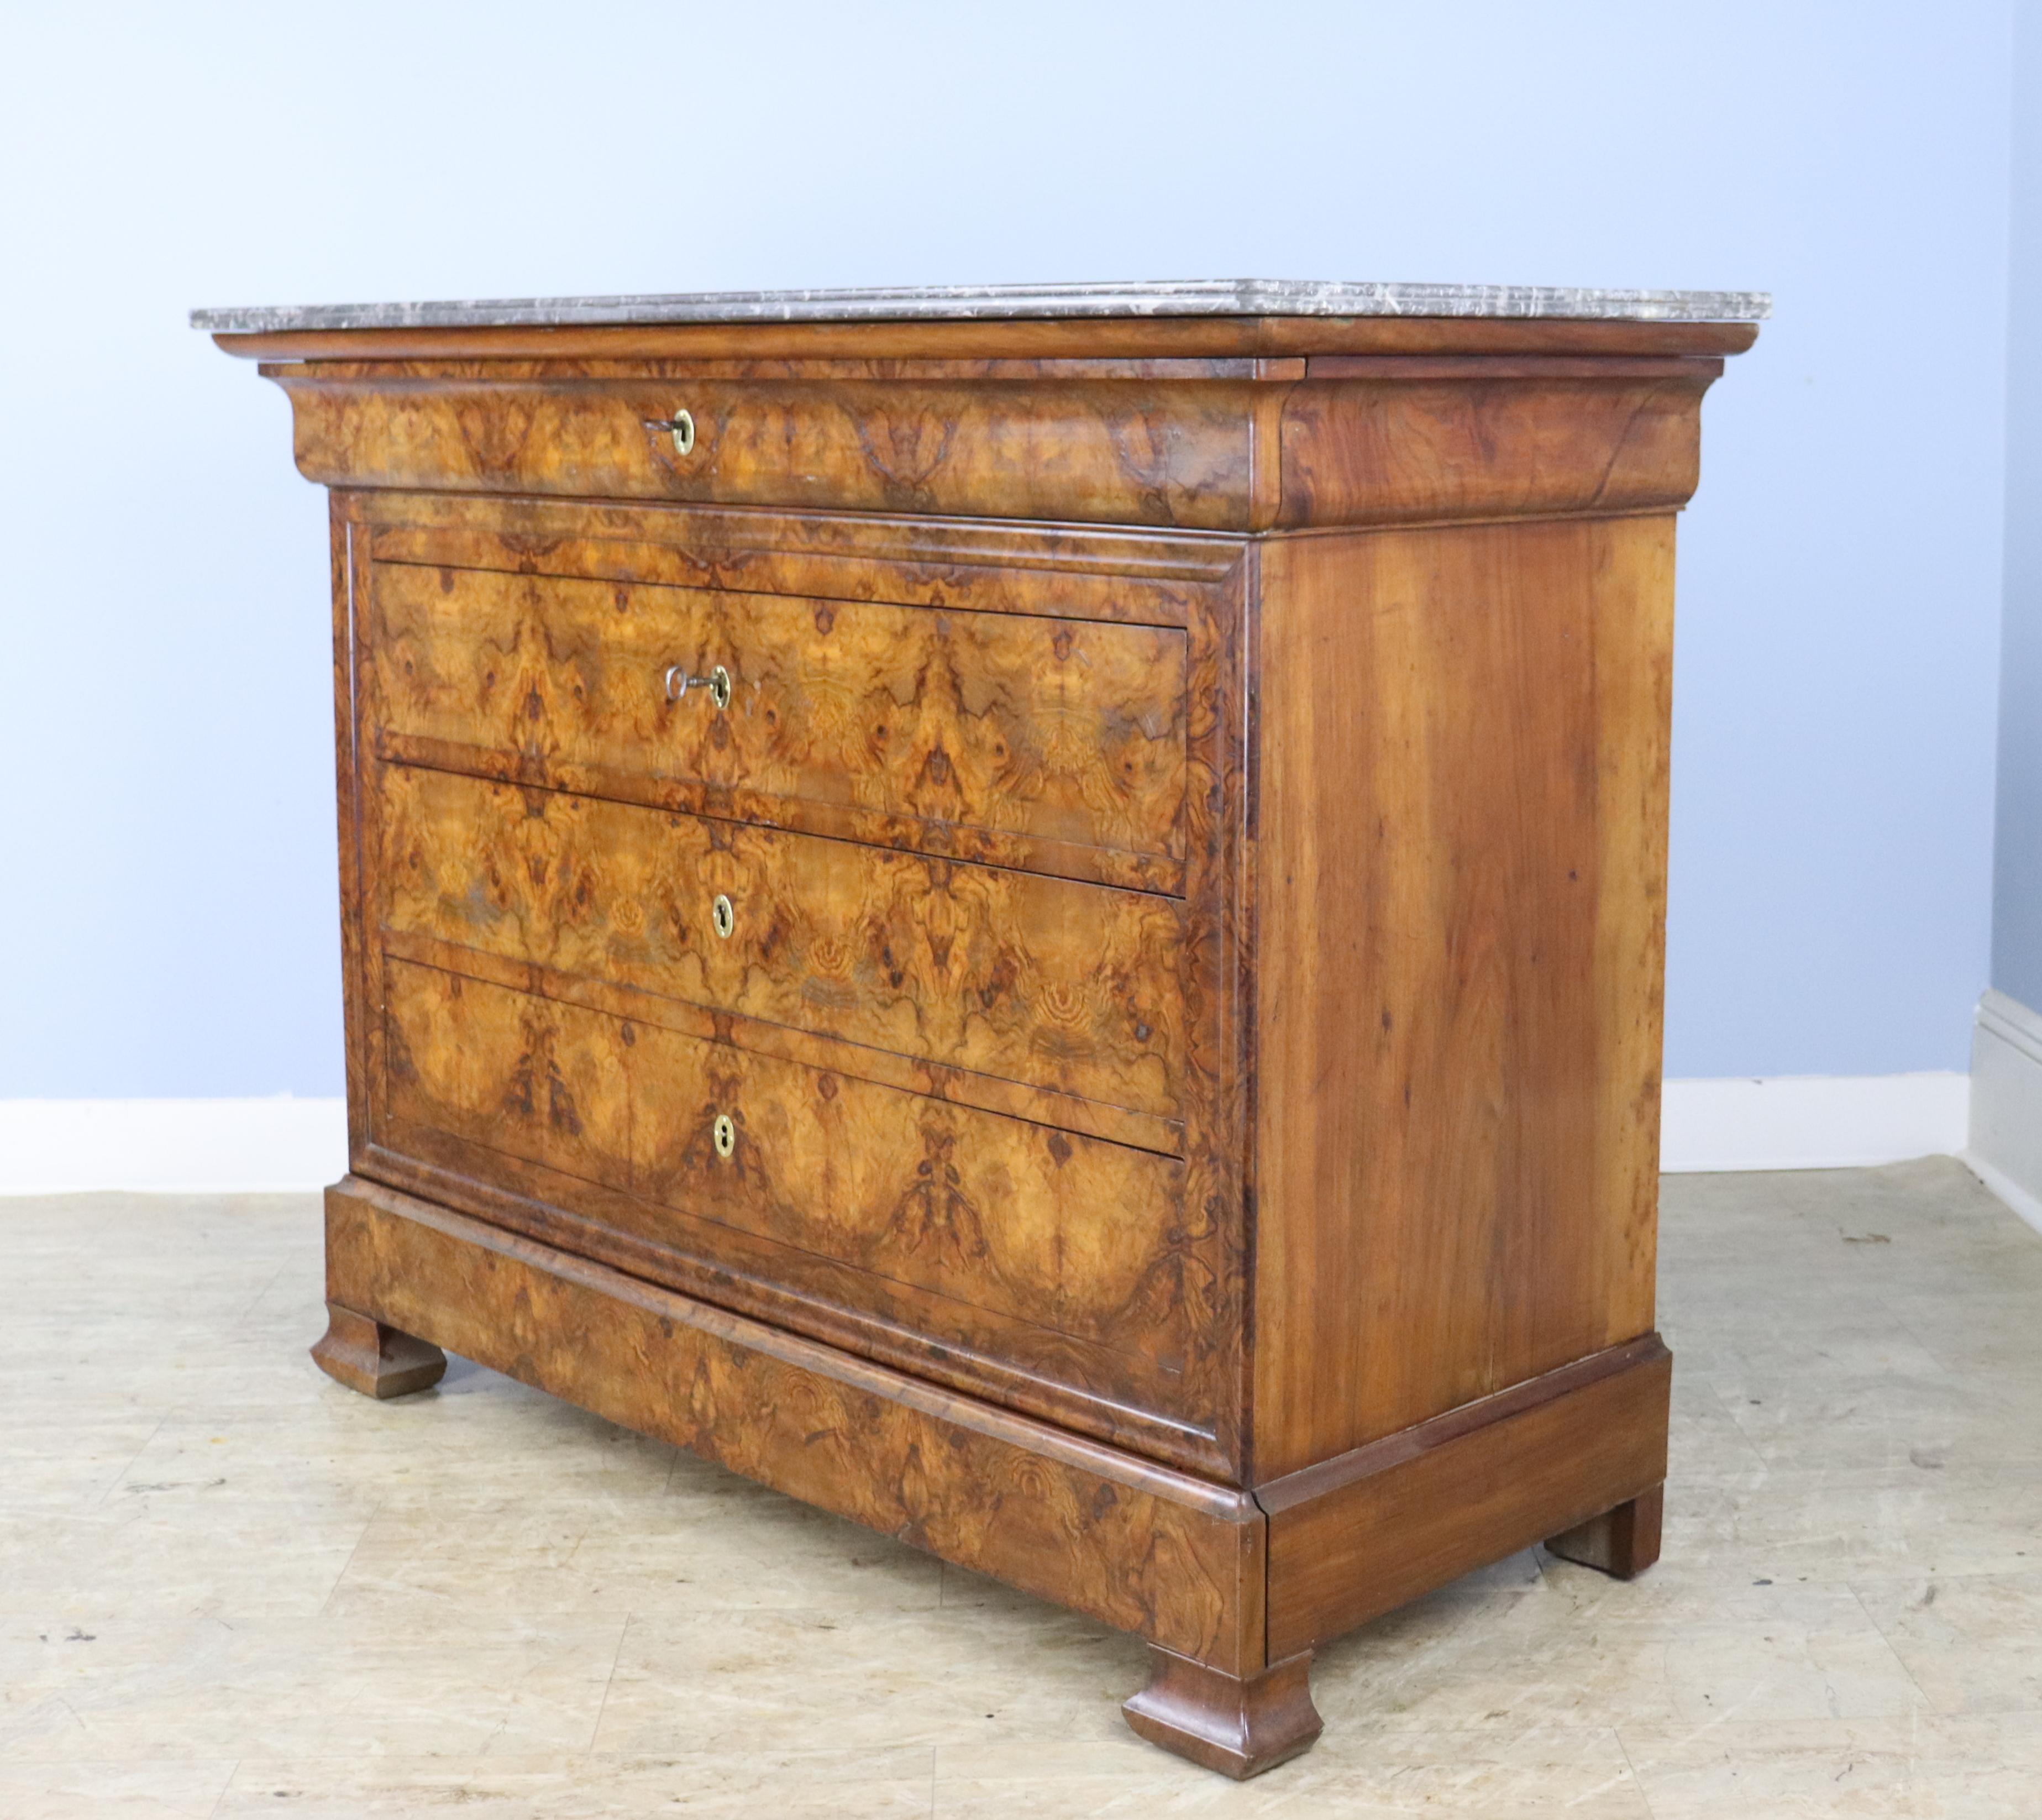 Antique Marble Topped Burr Elm Commode, Dramatic Bookmatched Veneer In Good Condition For Sale In Port Chester, NY